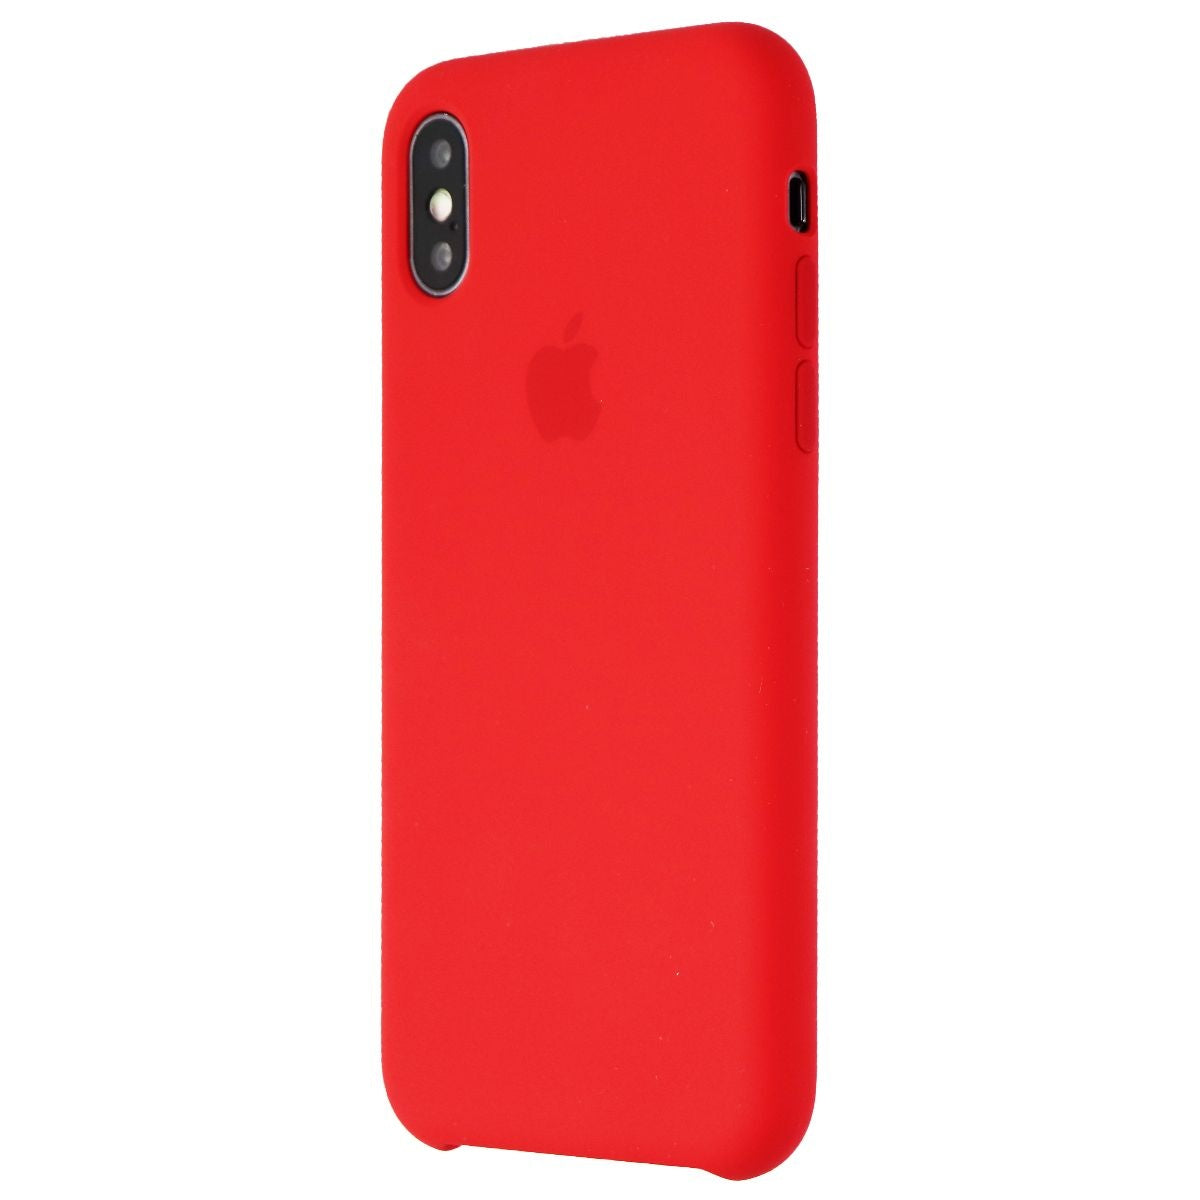 Apple Silicone Soft Case for Apple iPhone Xs Smartphones - Red (MRWC2ZM/A)